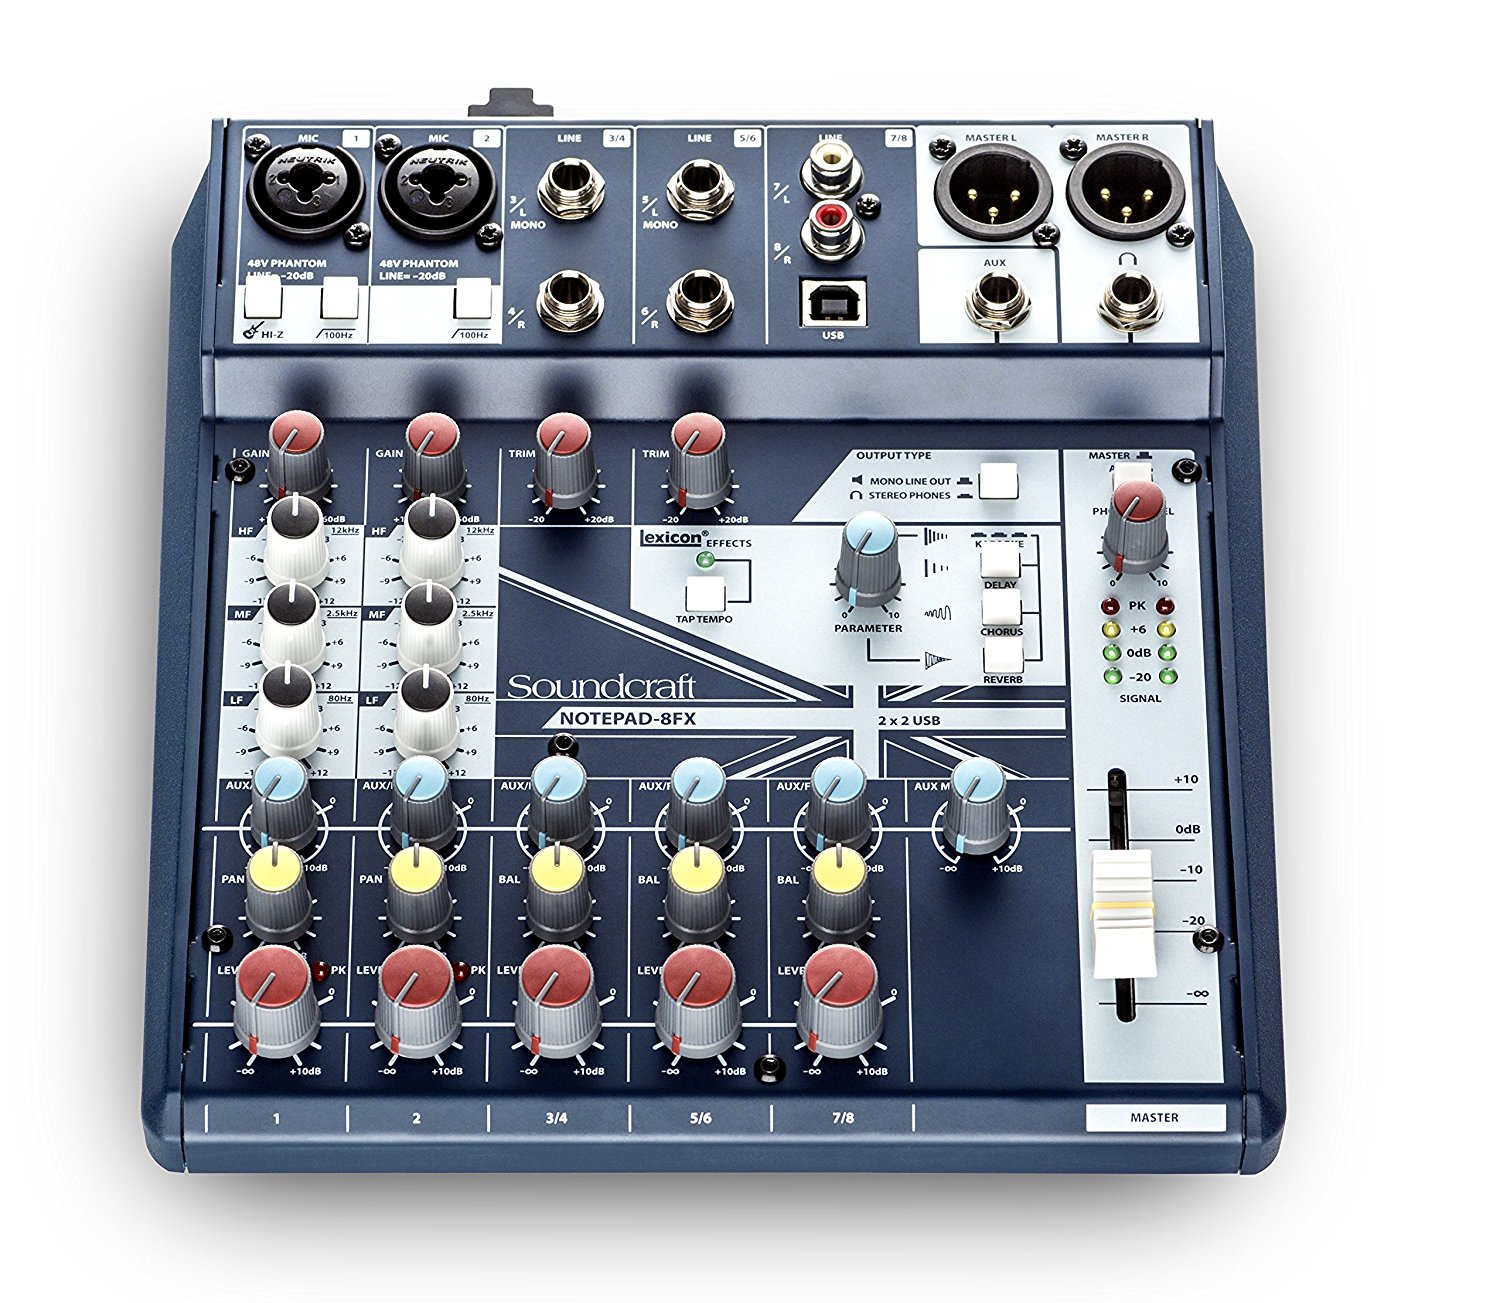 SOUNDCRAFT SMALL-FORMAT 8-CHANNEL ANALOG MIXING CONSOLE WITH USB I/O AND LEXICON EFFECTS, SOUNDCRAFT, AUDIO MIXER, soundcraft-small-format-8-channel-analog-mixing-console-with-usb-i-o-and-lexicon-effects, ZOSO MUSIC SDN BHD